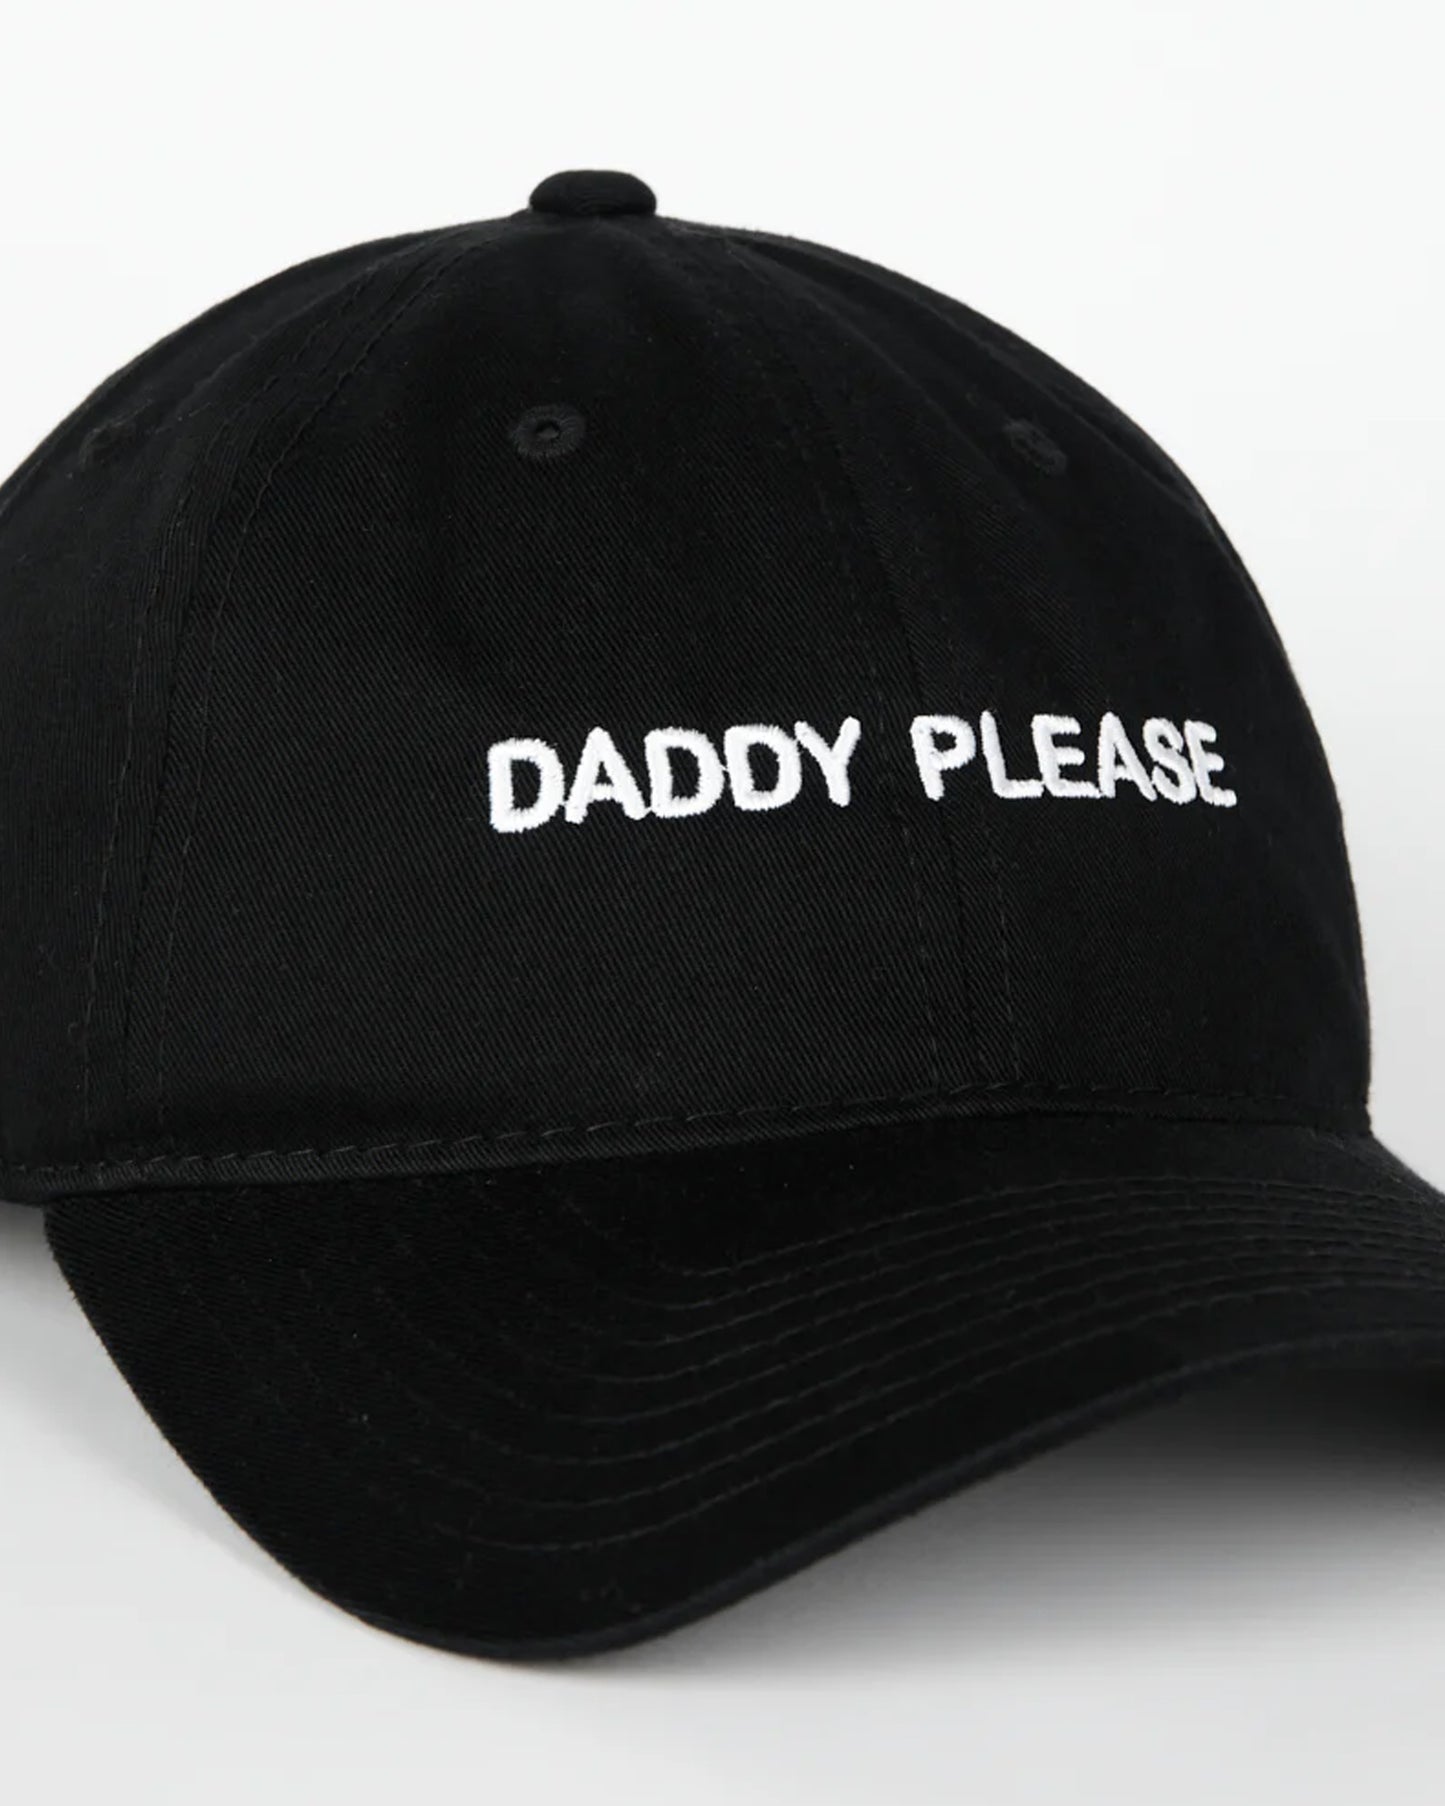 INTENTIONALLY BLANK Slogan Cap in "Daddy Please" available at Lahn.shop